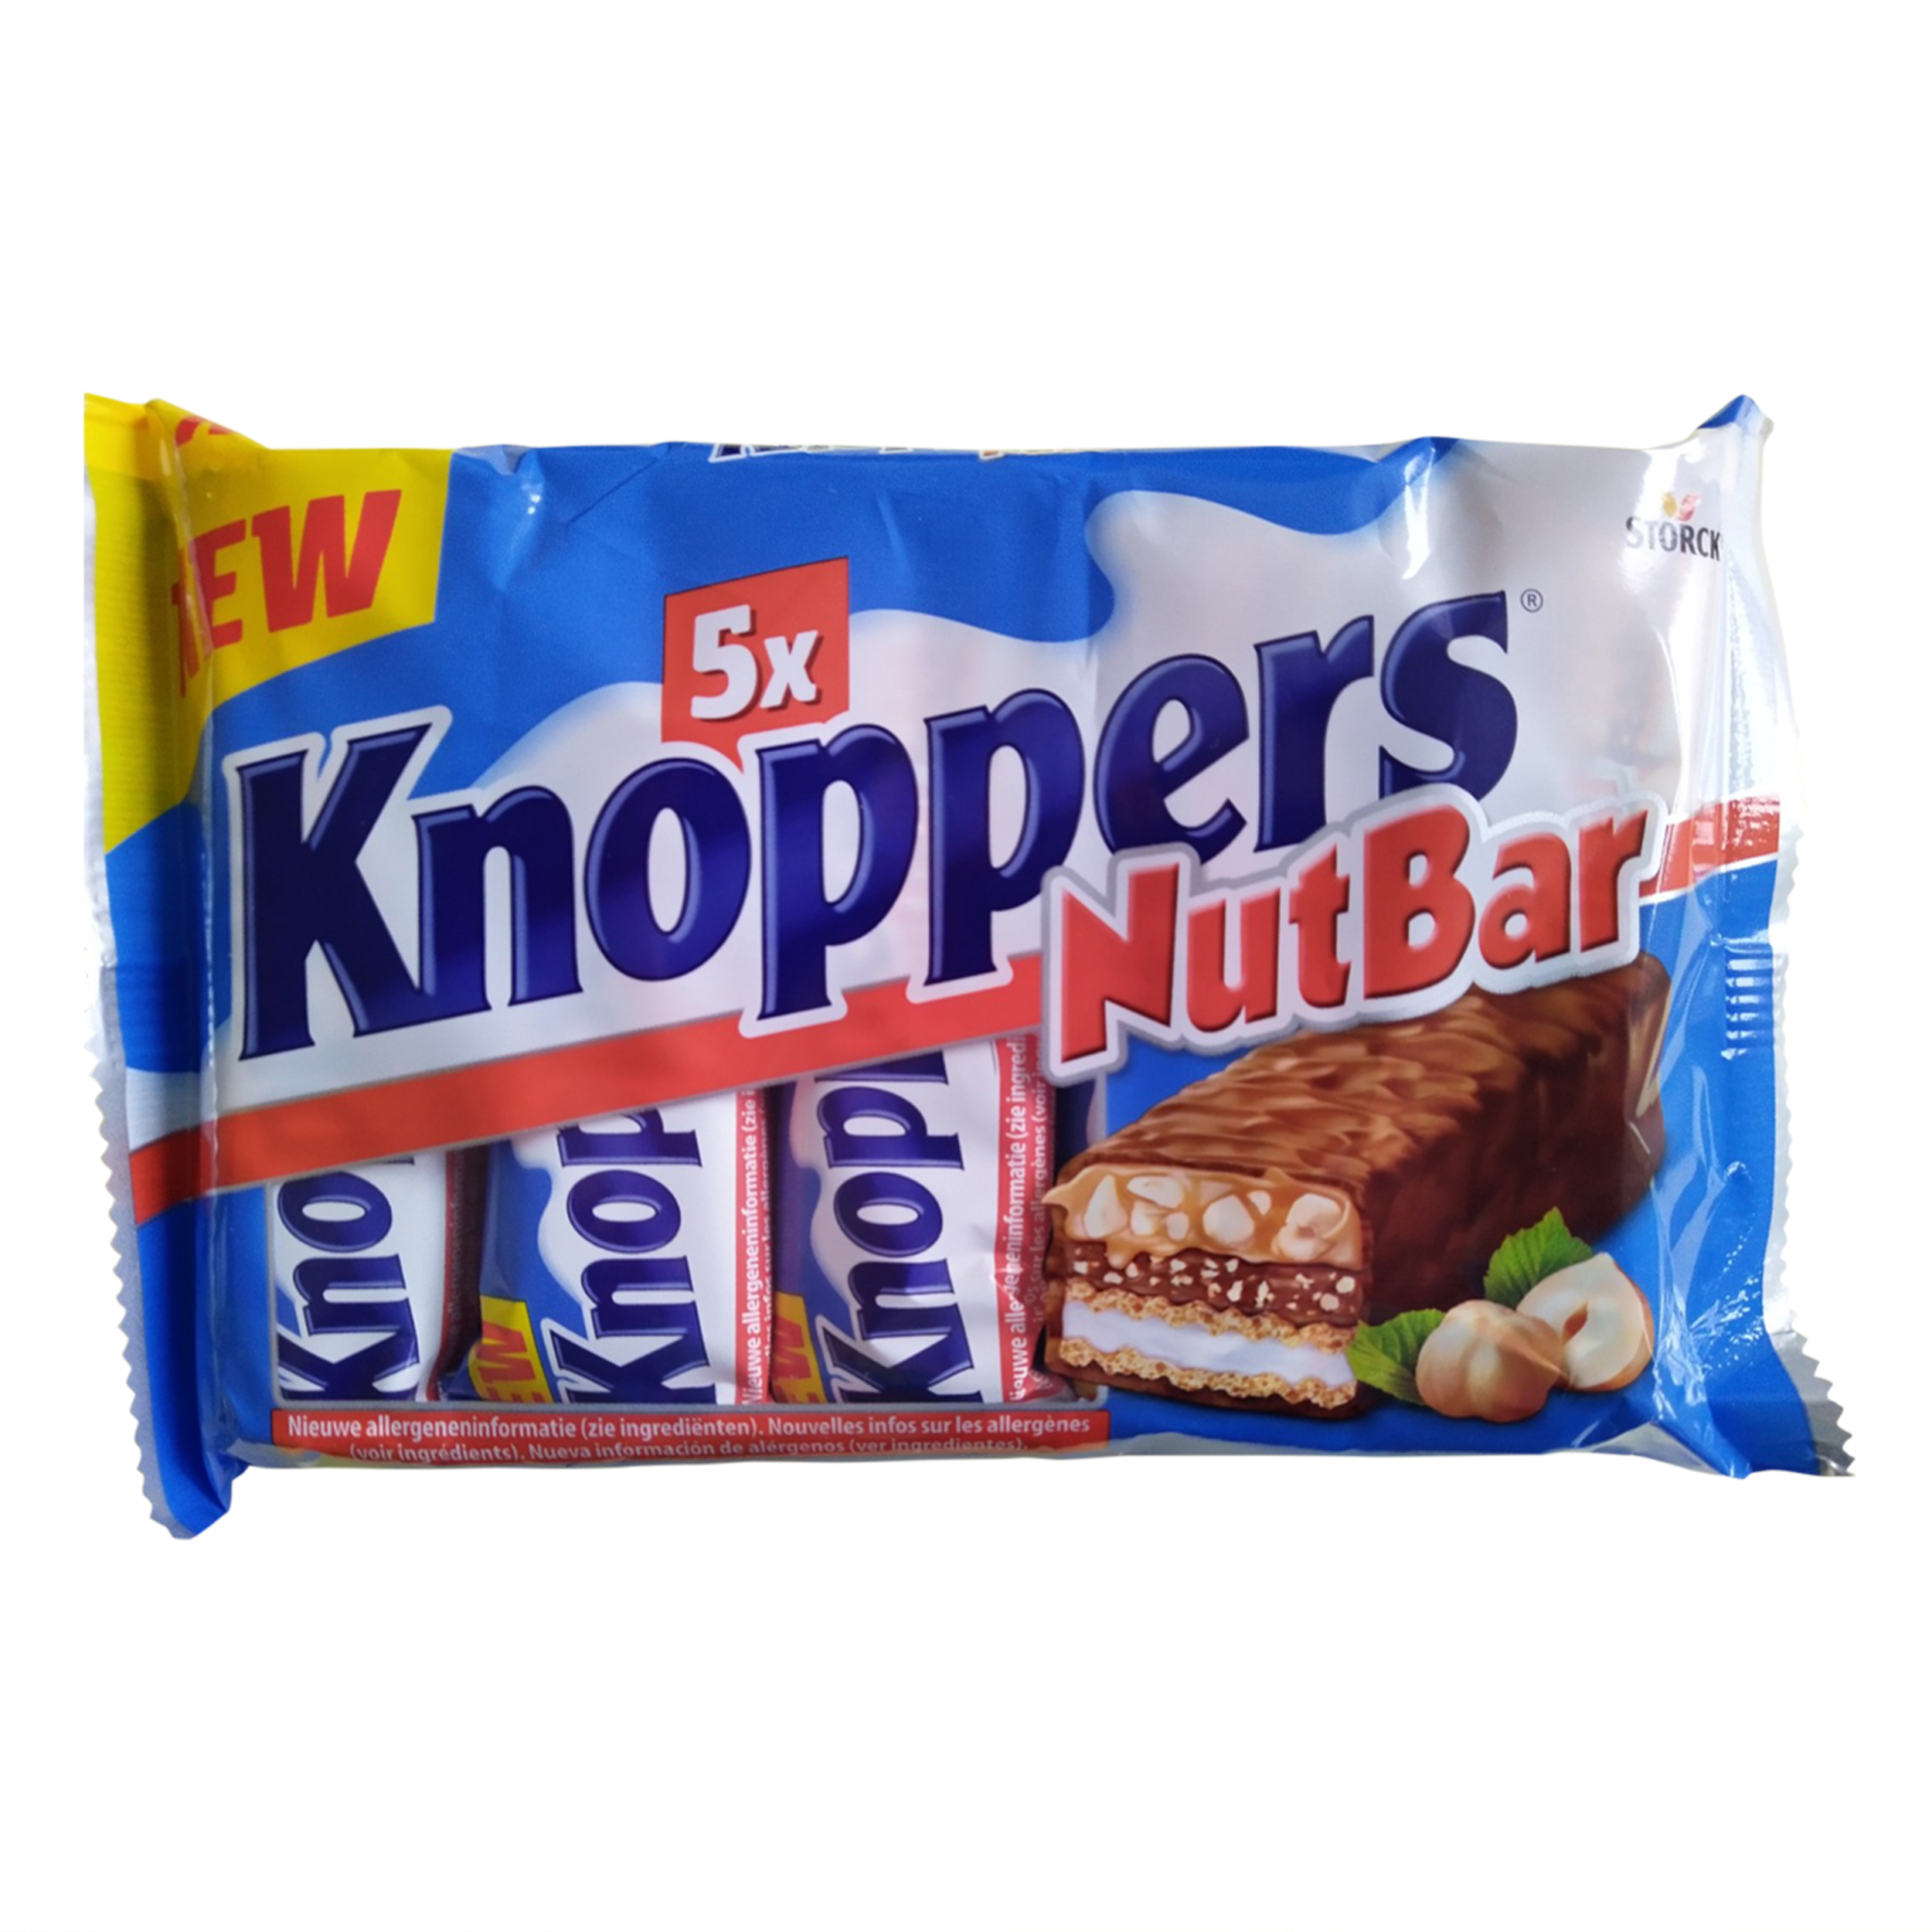 View on Packets Knoppers Chocolate Wafers in Shelf of German ...